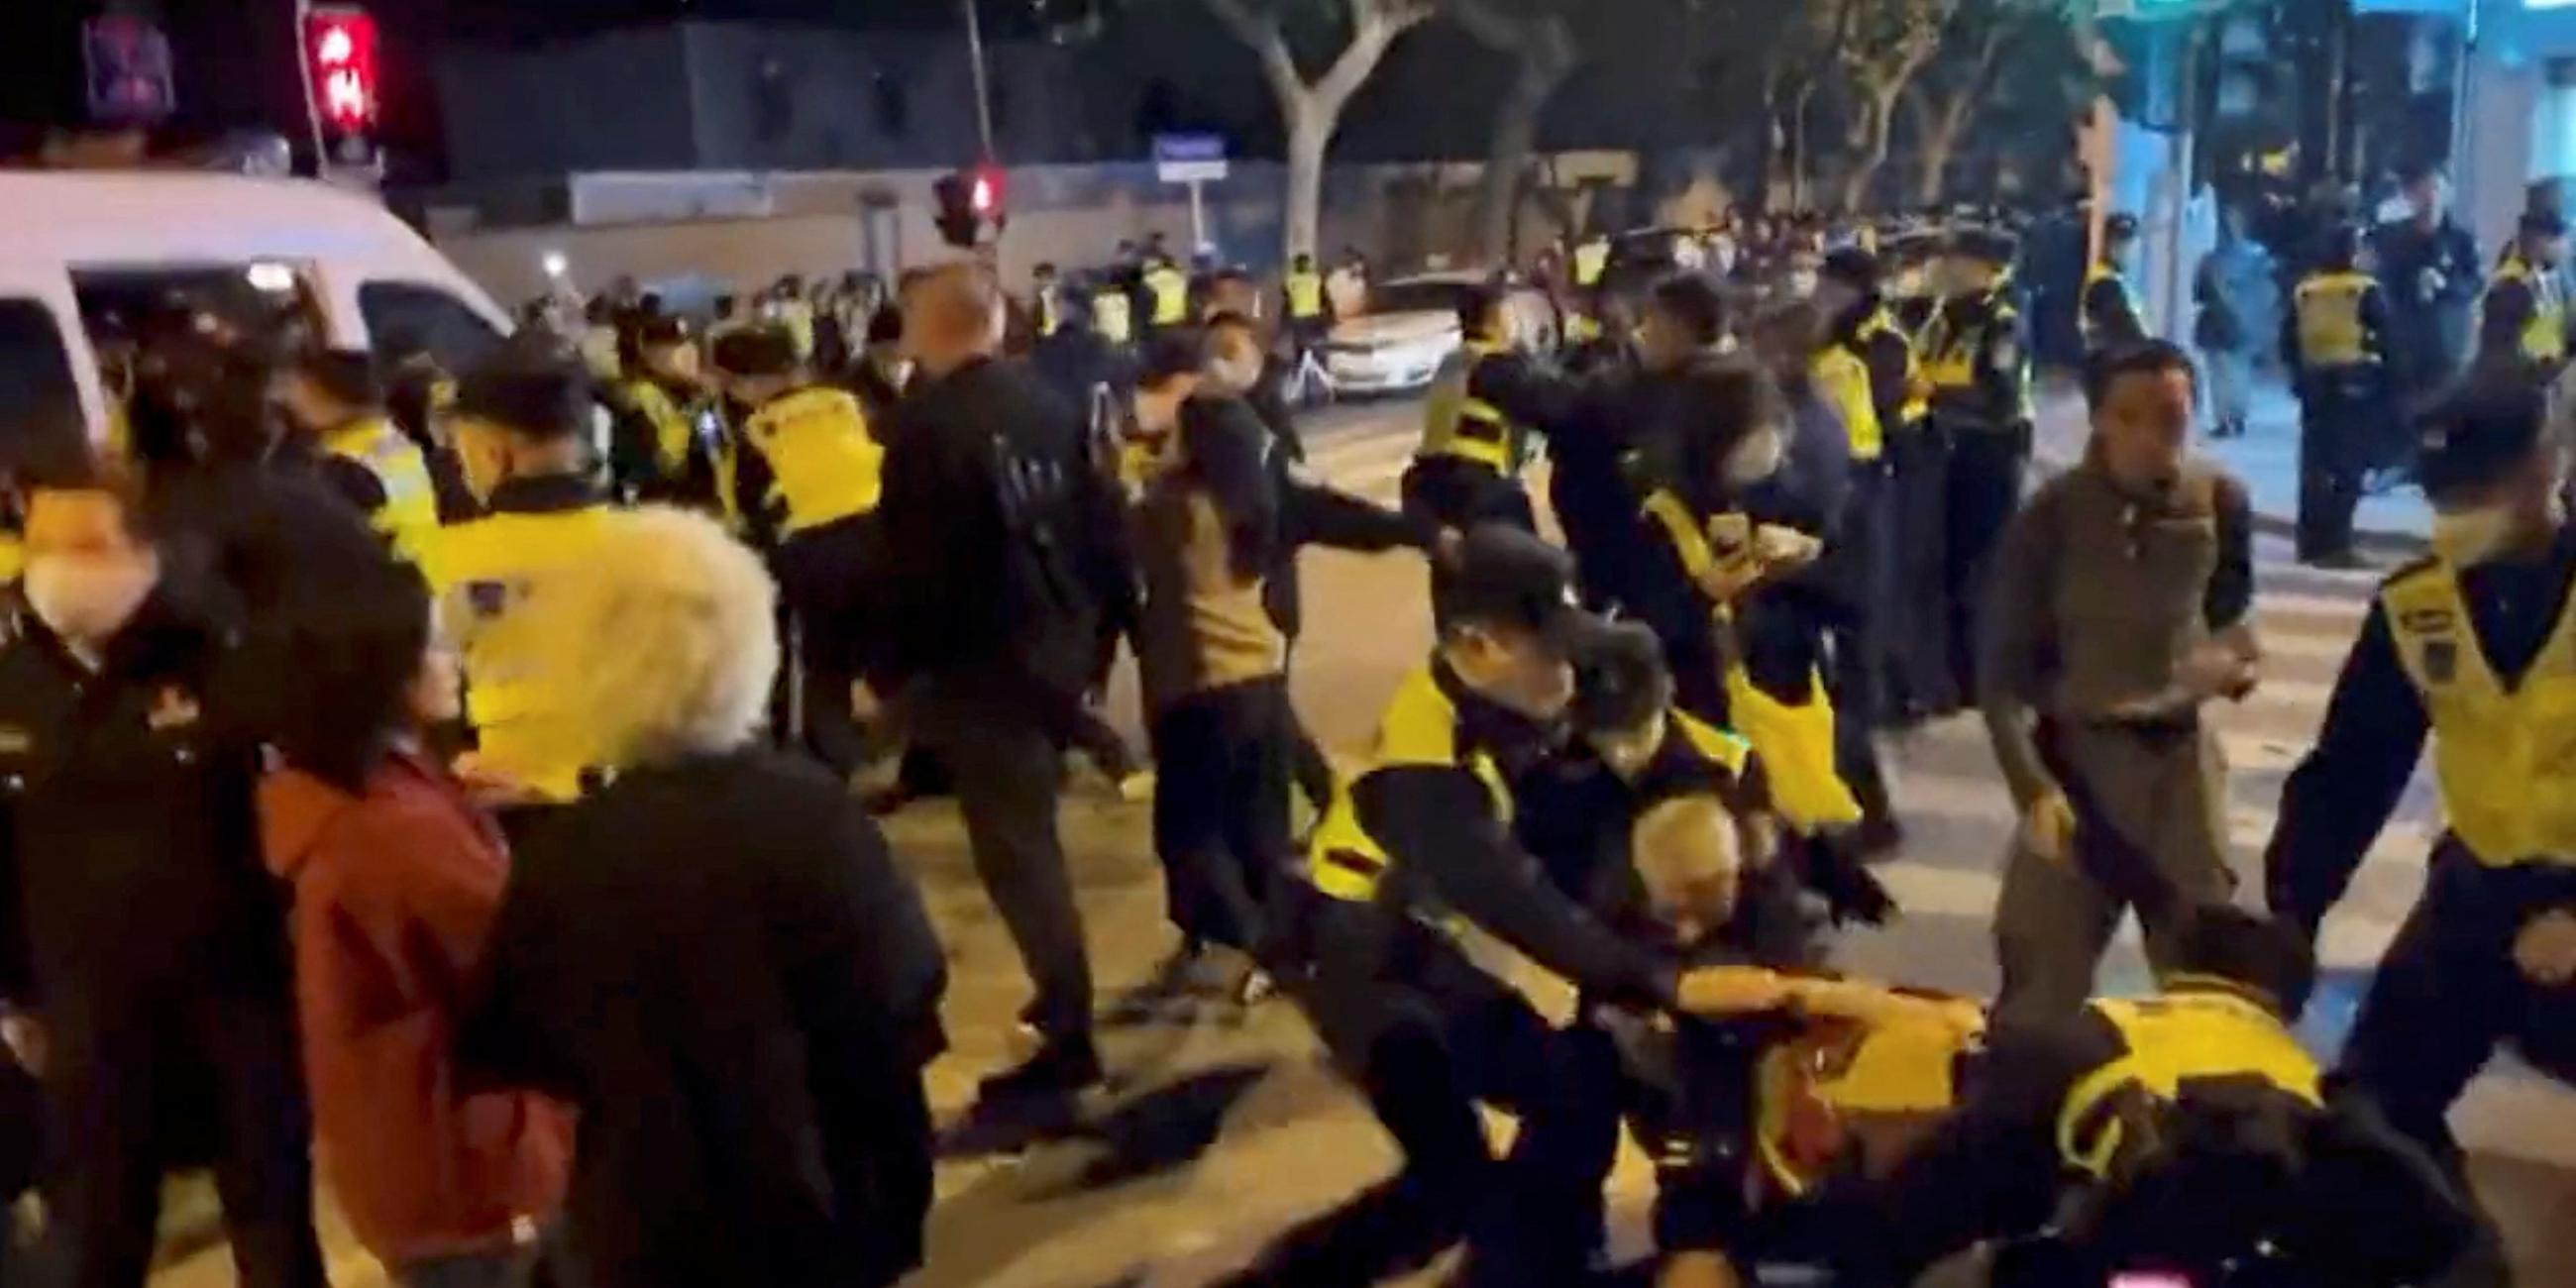 Police officers detain people during a protest against coronavirus disease (COVID-19) curbs at the site of a candlelight vigil for victims of the Urumqi fire, in Shanghai, China in this screengrab obtained from a video released on November 27, 2022.